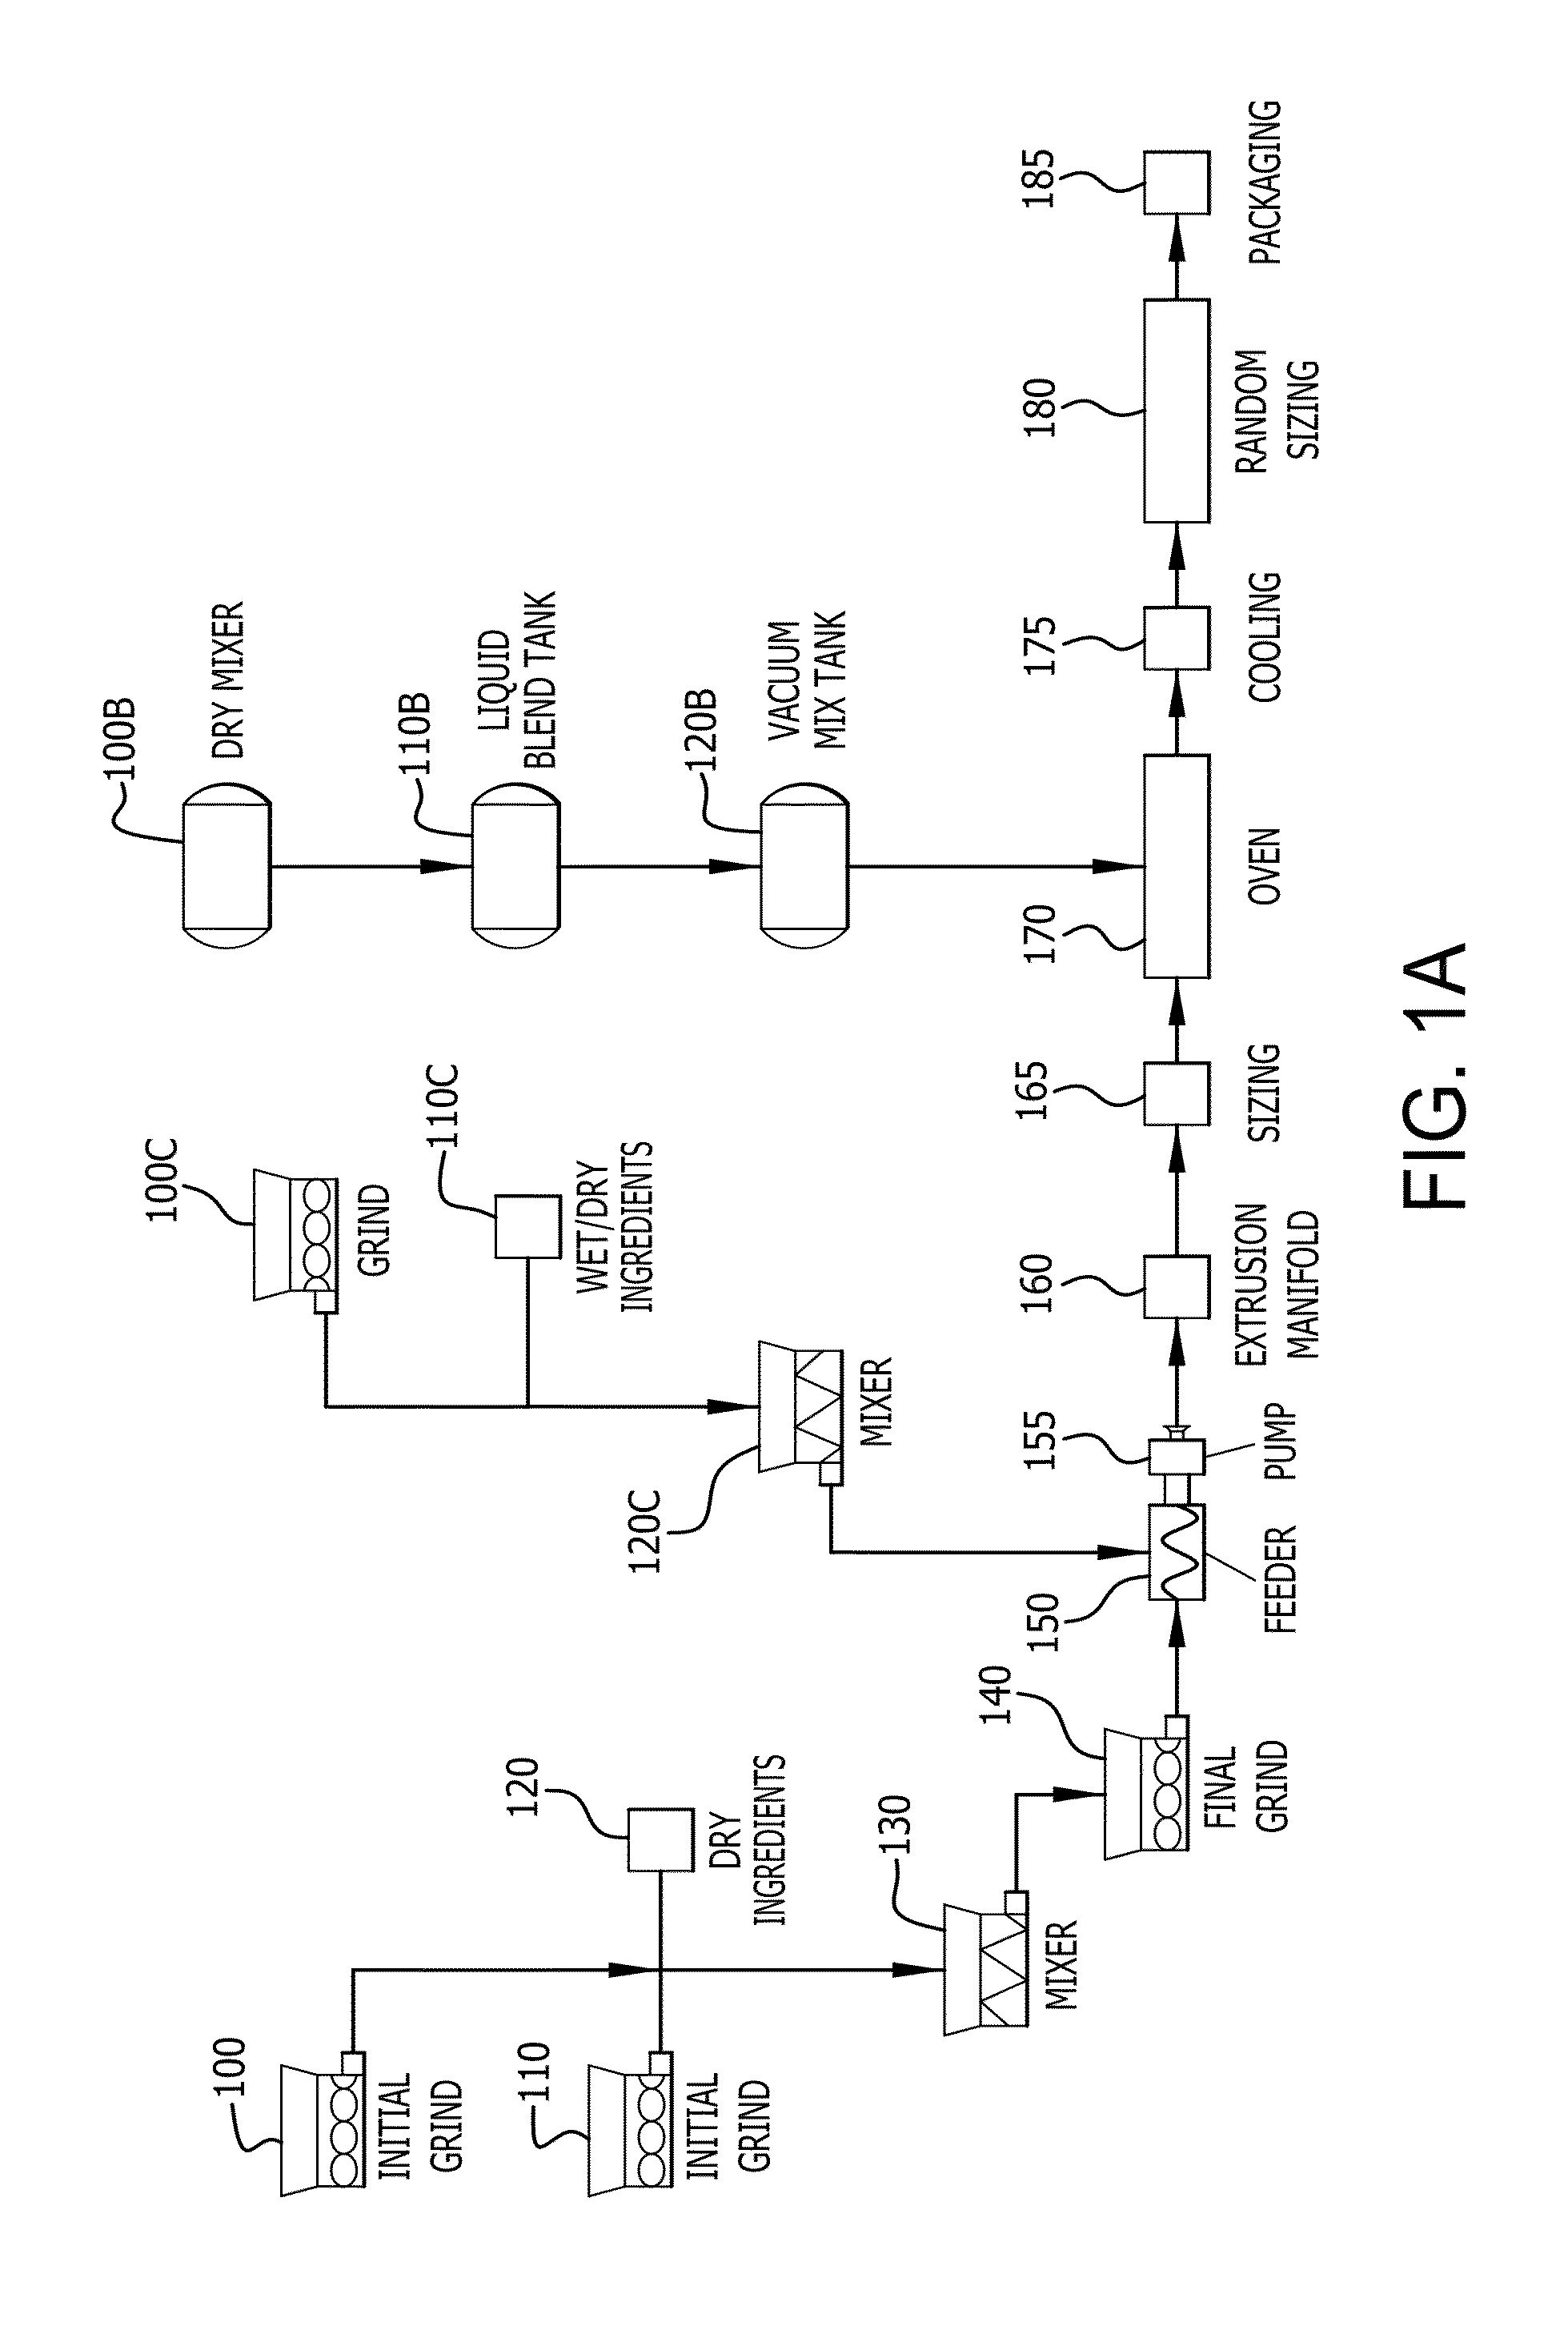 Apparatus, Systems and Methods for Manufacturing Food Products